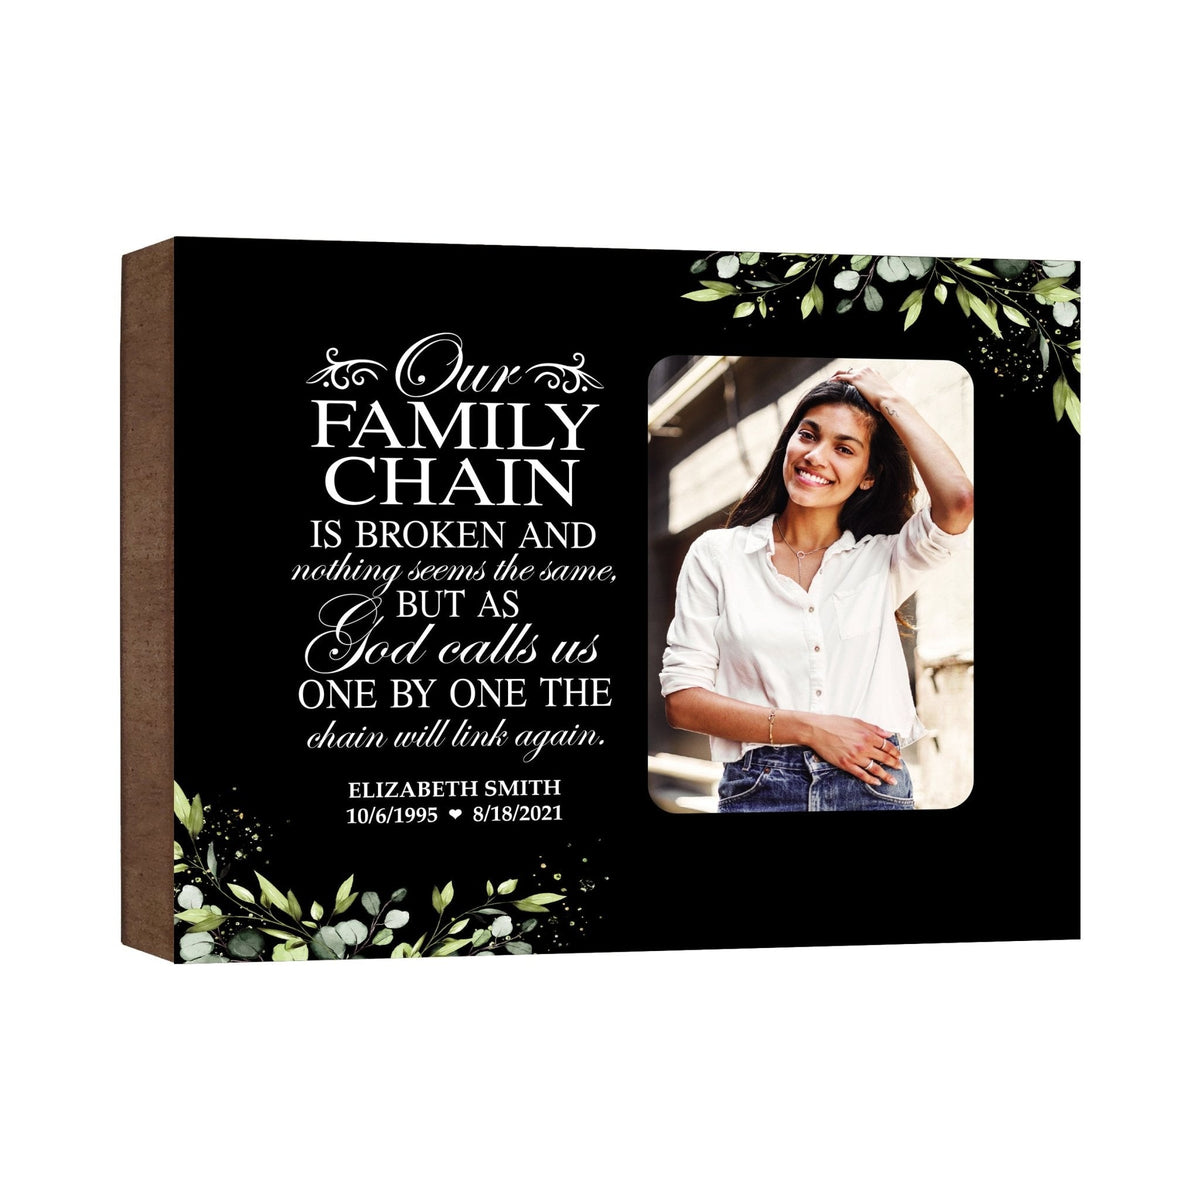 Personalized Human Memorial Black Photo &amp; Inspirational Verse Bereavement Wall Décor &amp; Sympathy Gift Ideas - Our Family Chain - LifeSong Milestones